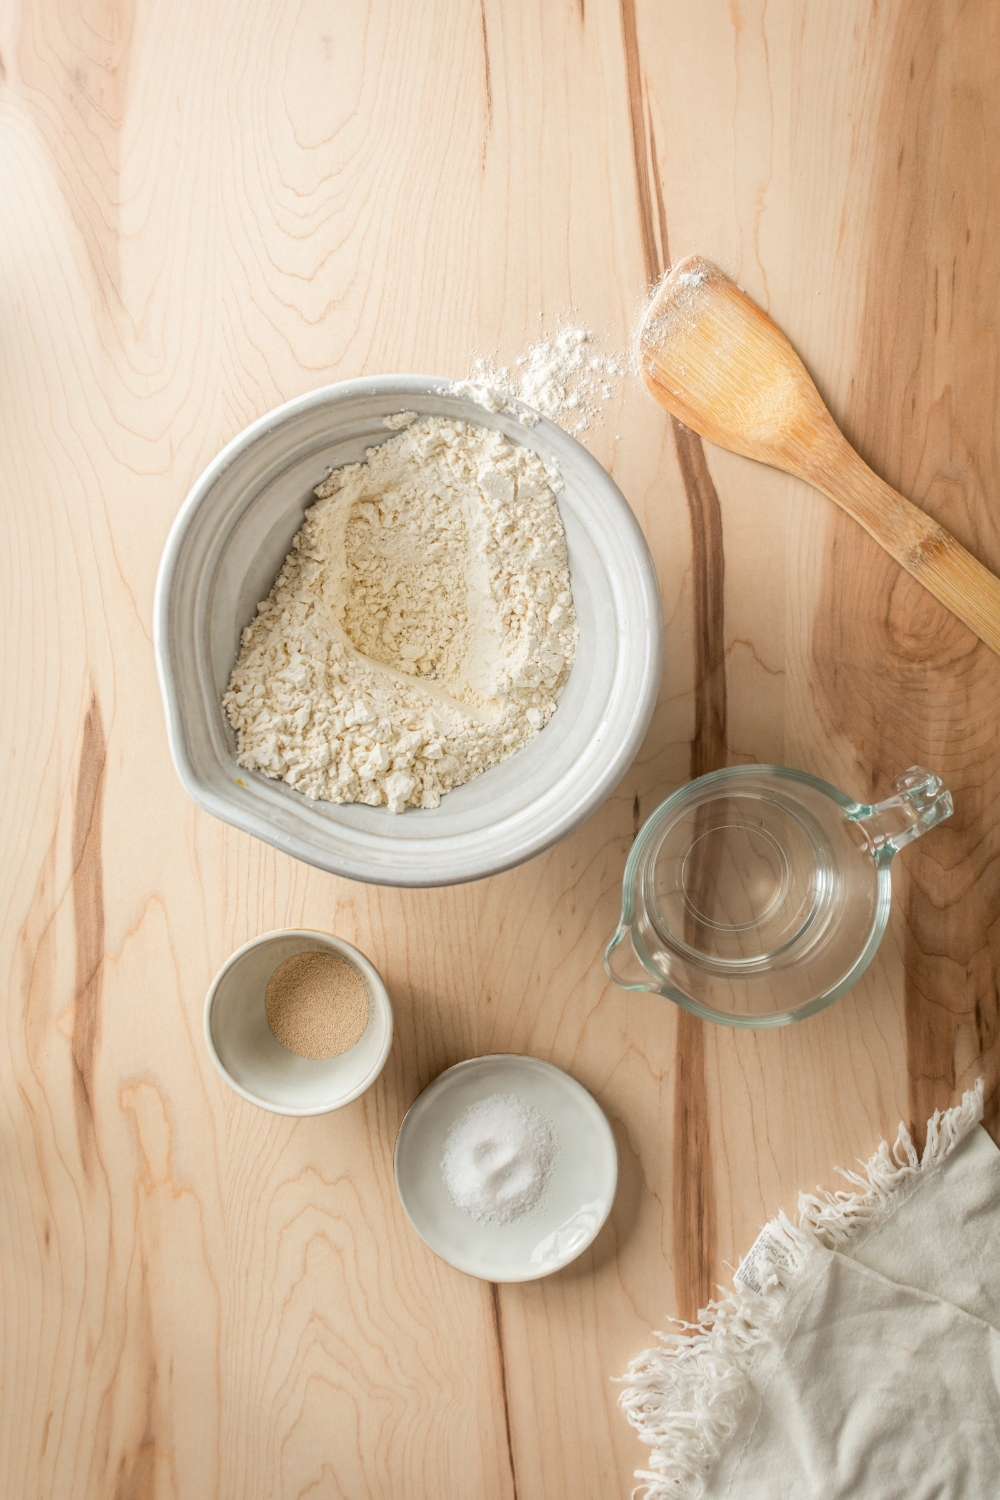 A large white bowl filled with flour, a small bowl filled with active yeast, a small dish filled with salt, a small pitcher filled with water, and a wooden spoon all on a wood counter.